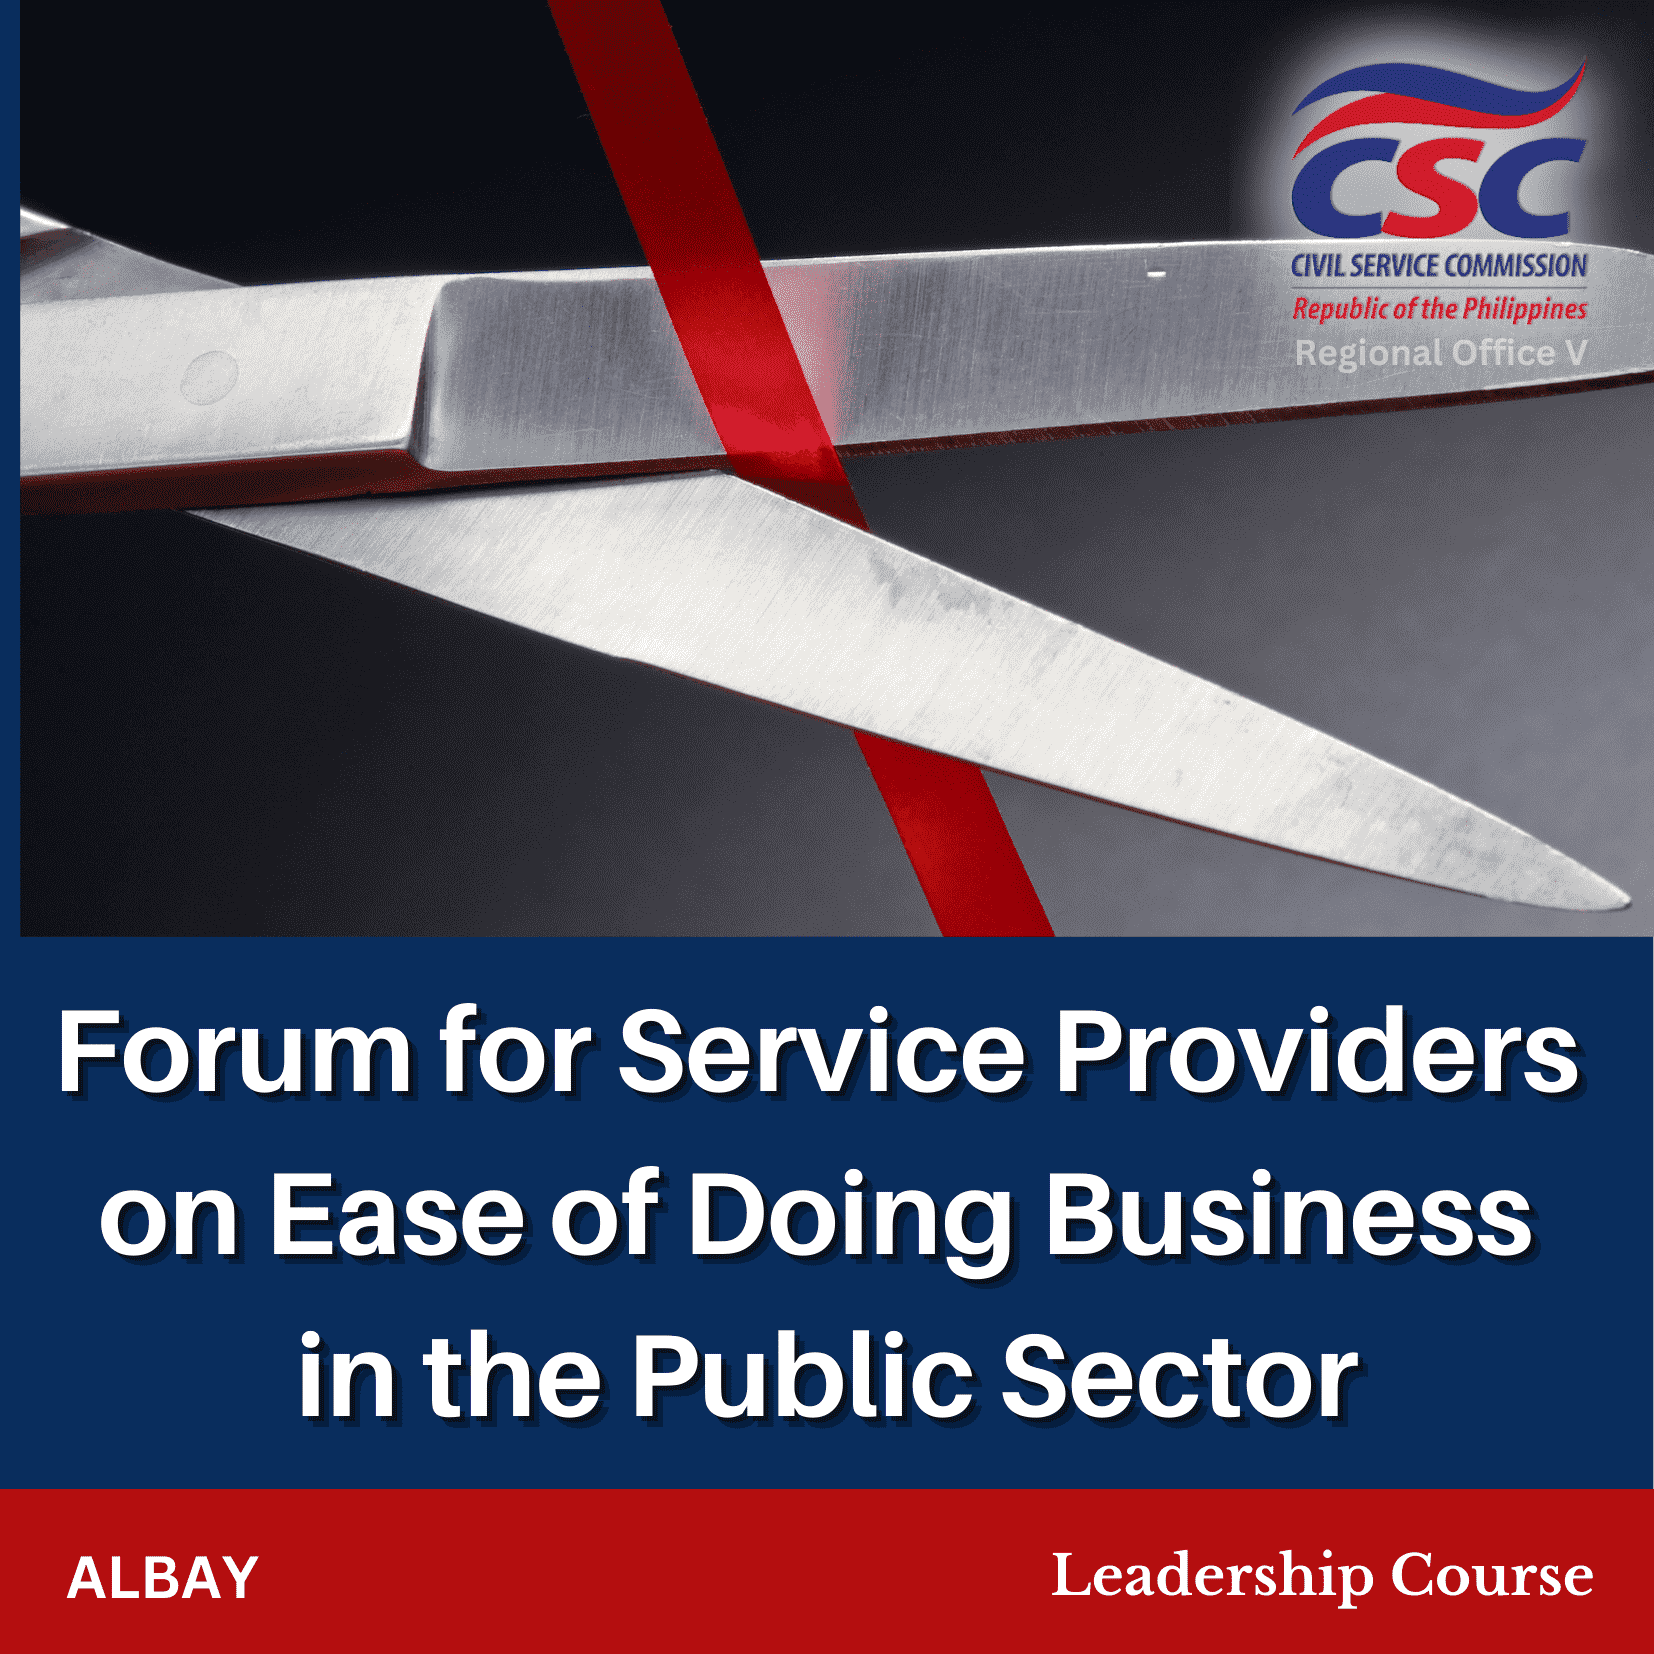 Forum on Ease of Doing Business in the Public Sector for Service Providers (Albay)